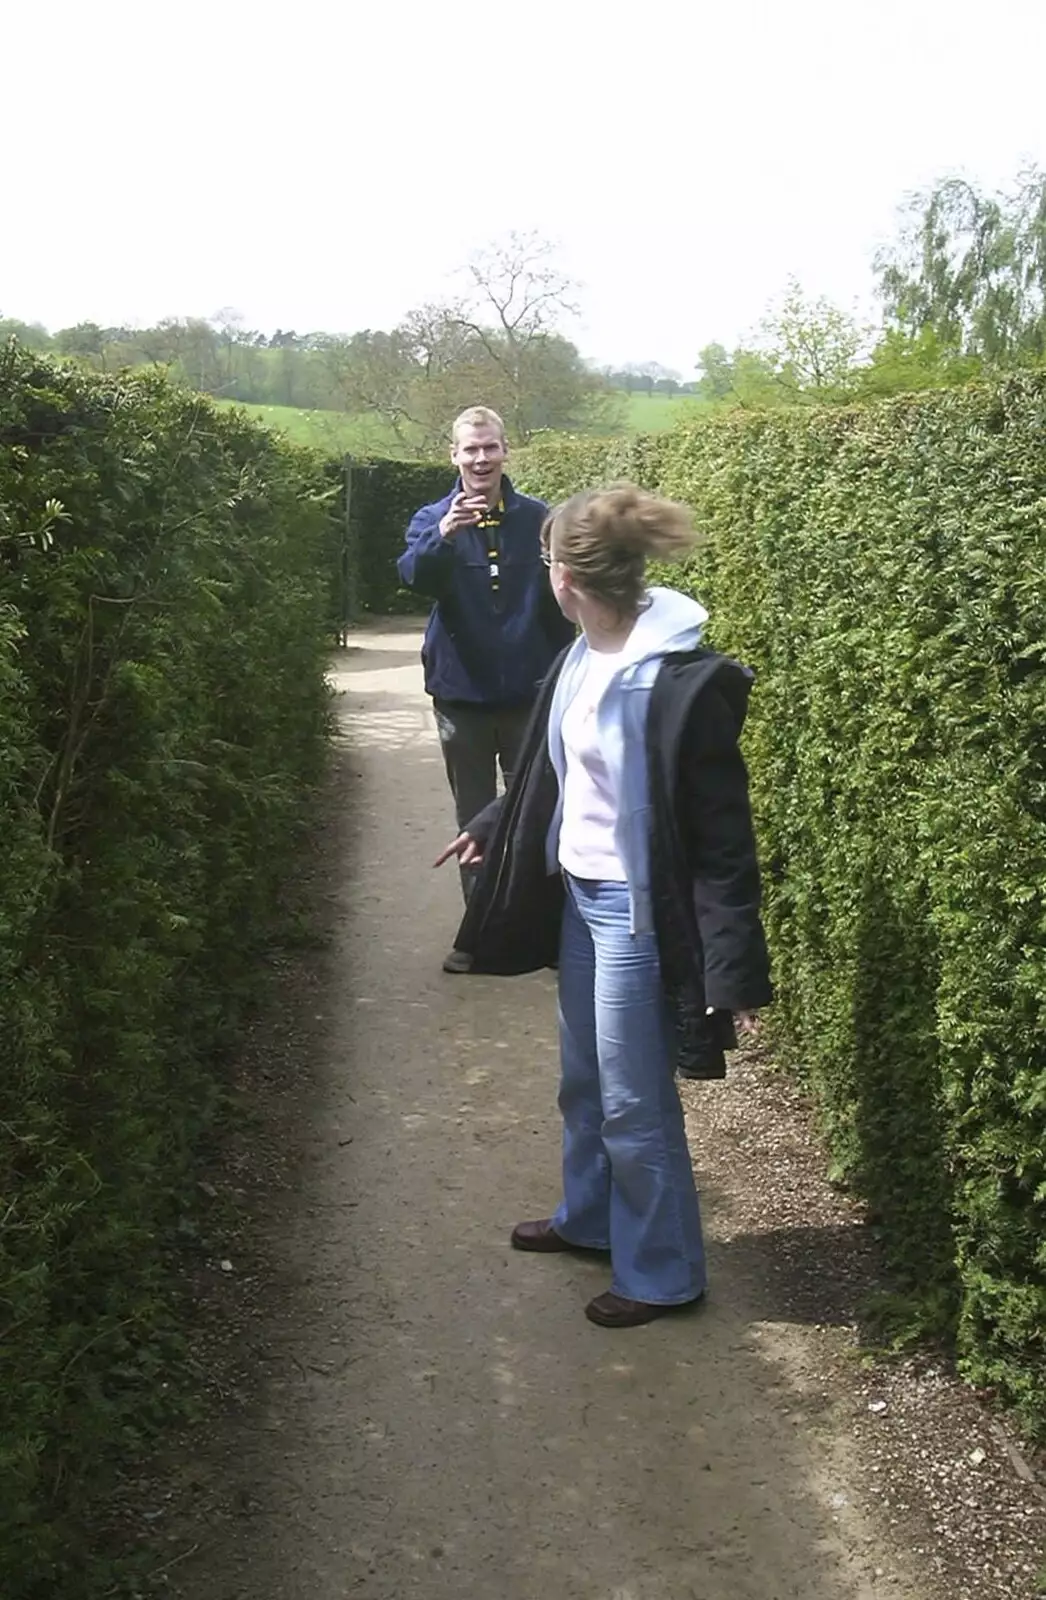 Bill catches up with Suey, from A Trip Around Leeds Castle, Maidstone, Kent - 9th May 2004